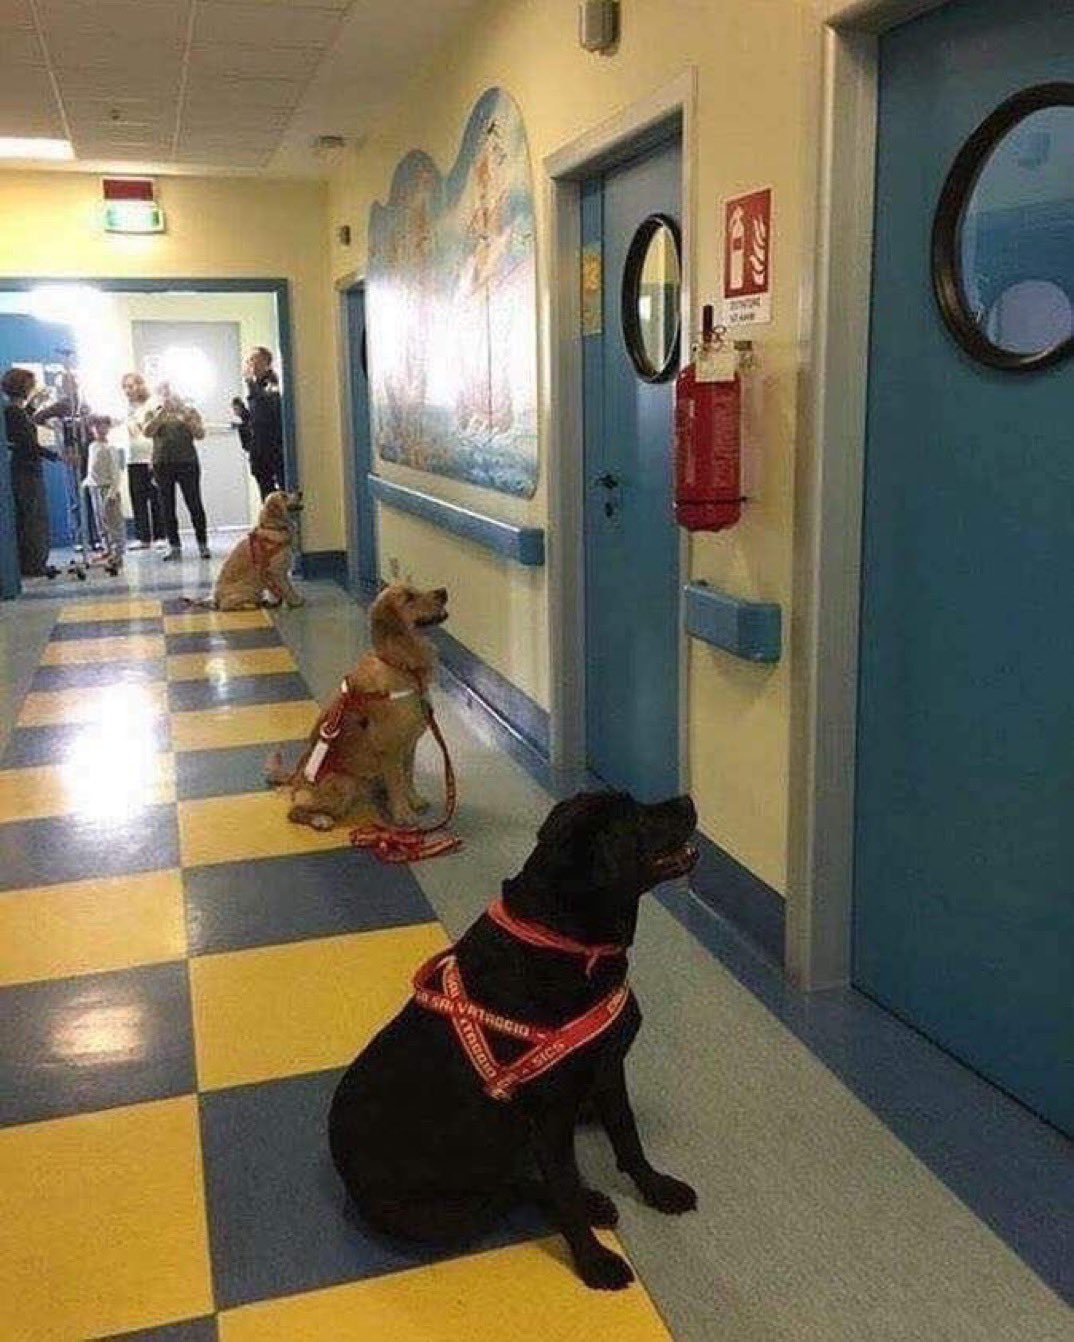 Therapy dogs waiting to start their shift at a children’s hospital